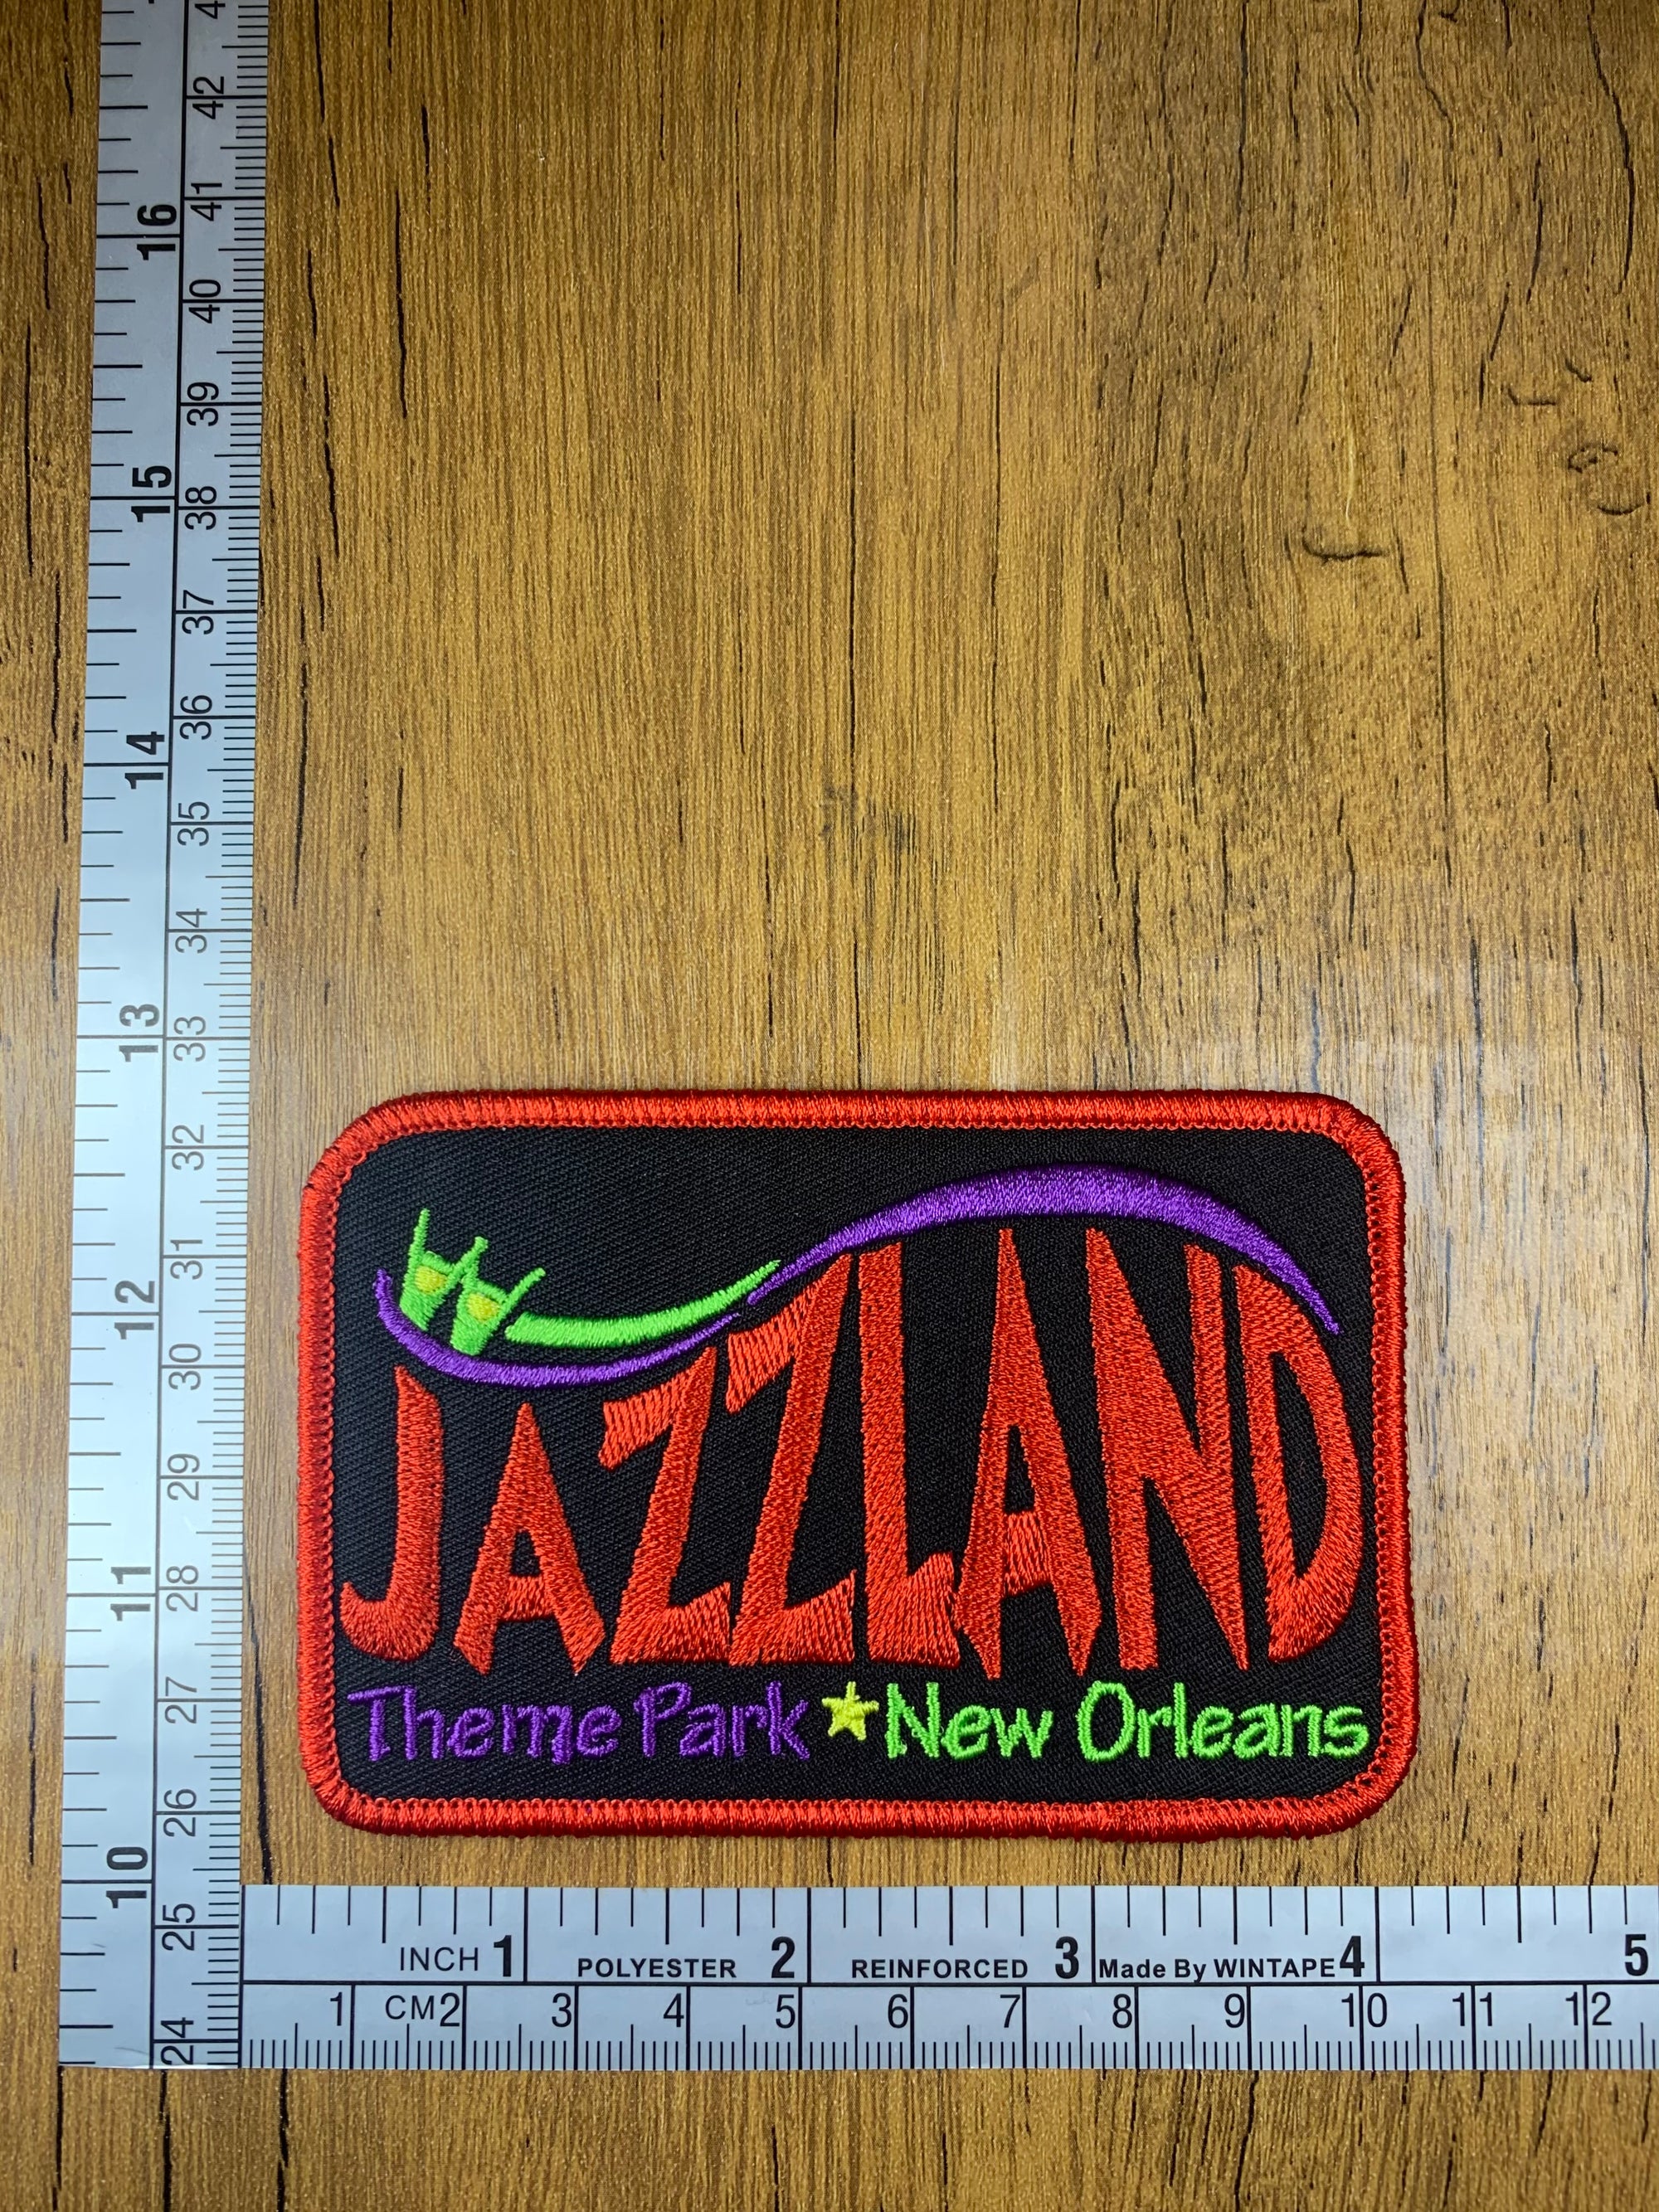 Jazz land Themed Park- New Orleans, Roller Coasters, Fun